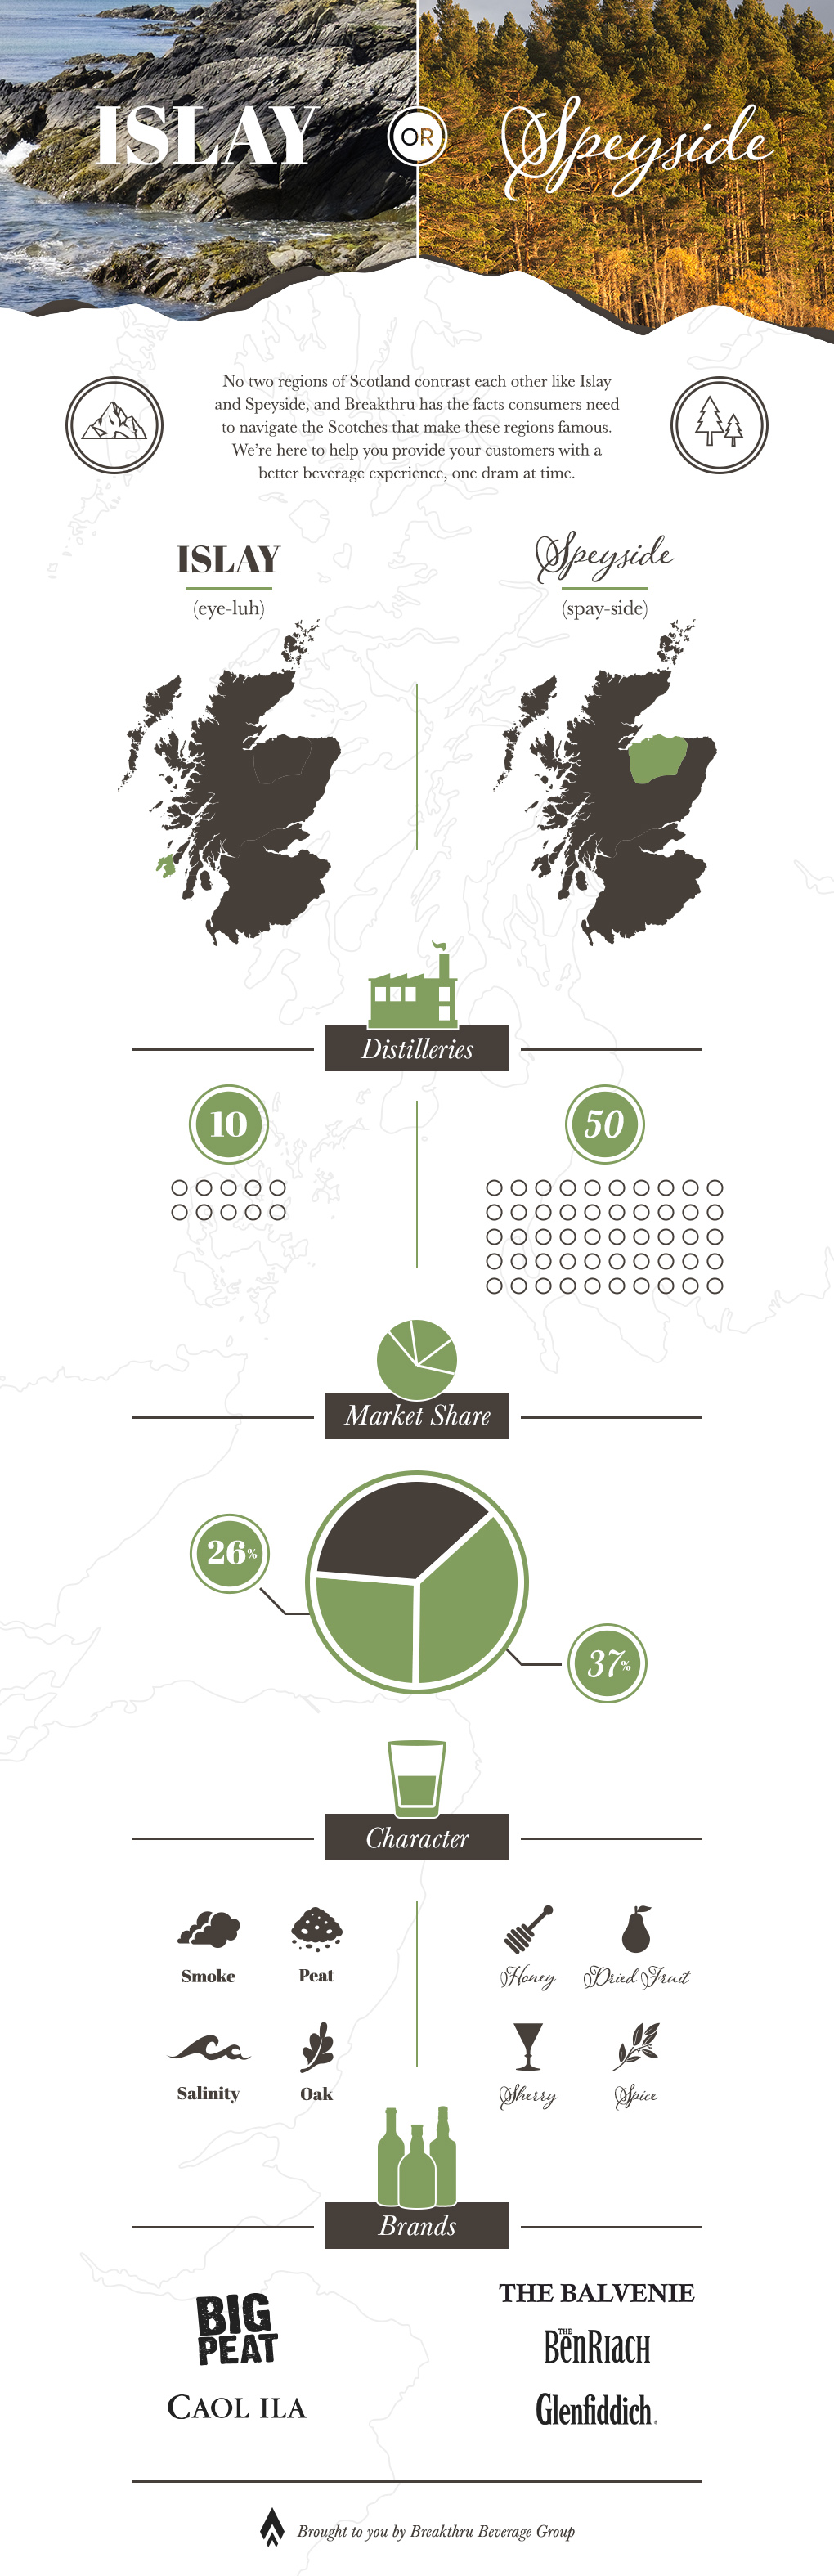 FL - Islay or Speyside Infographic